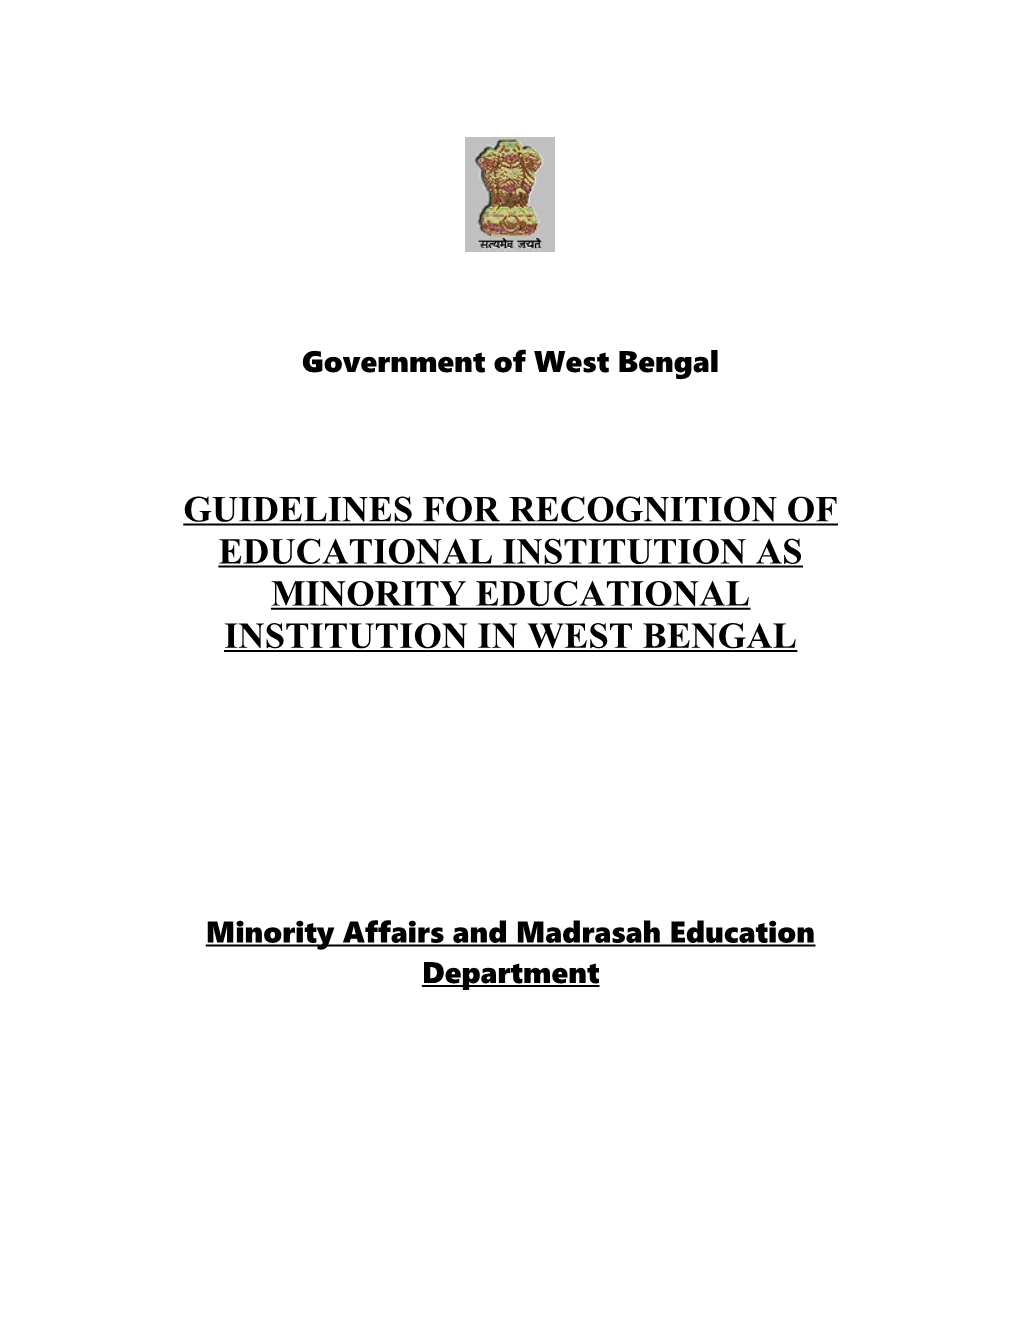 Guidelines for Recognition of Educational Institution As Minority Educational Institution